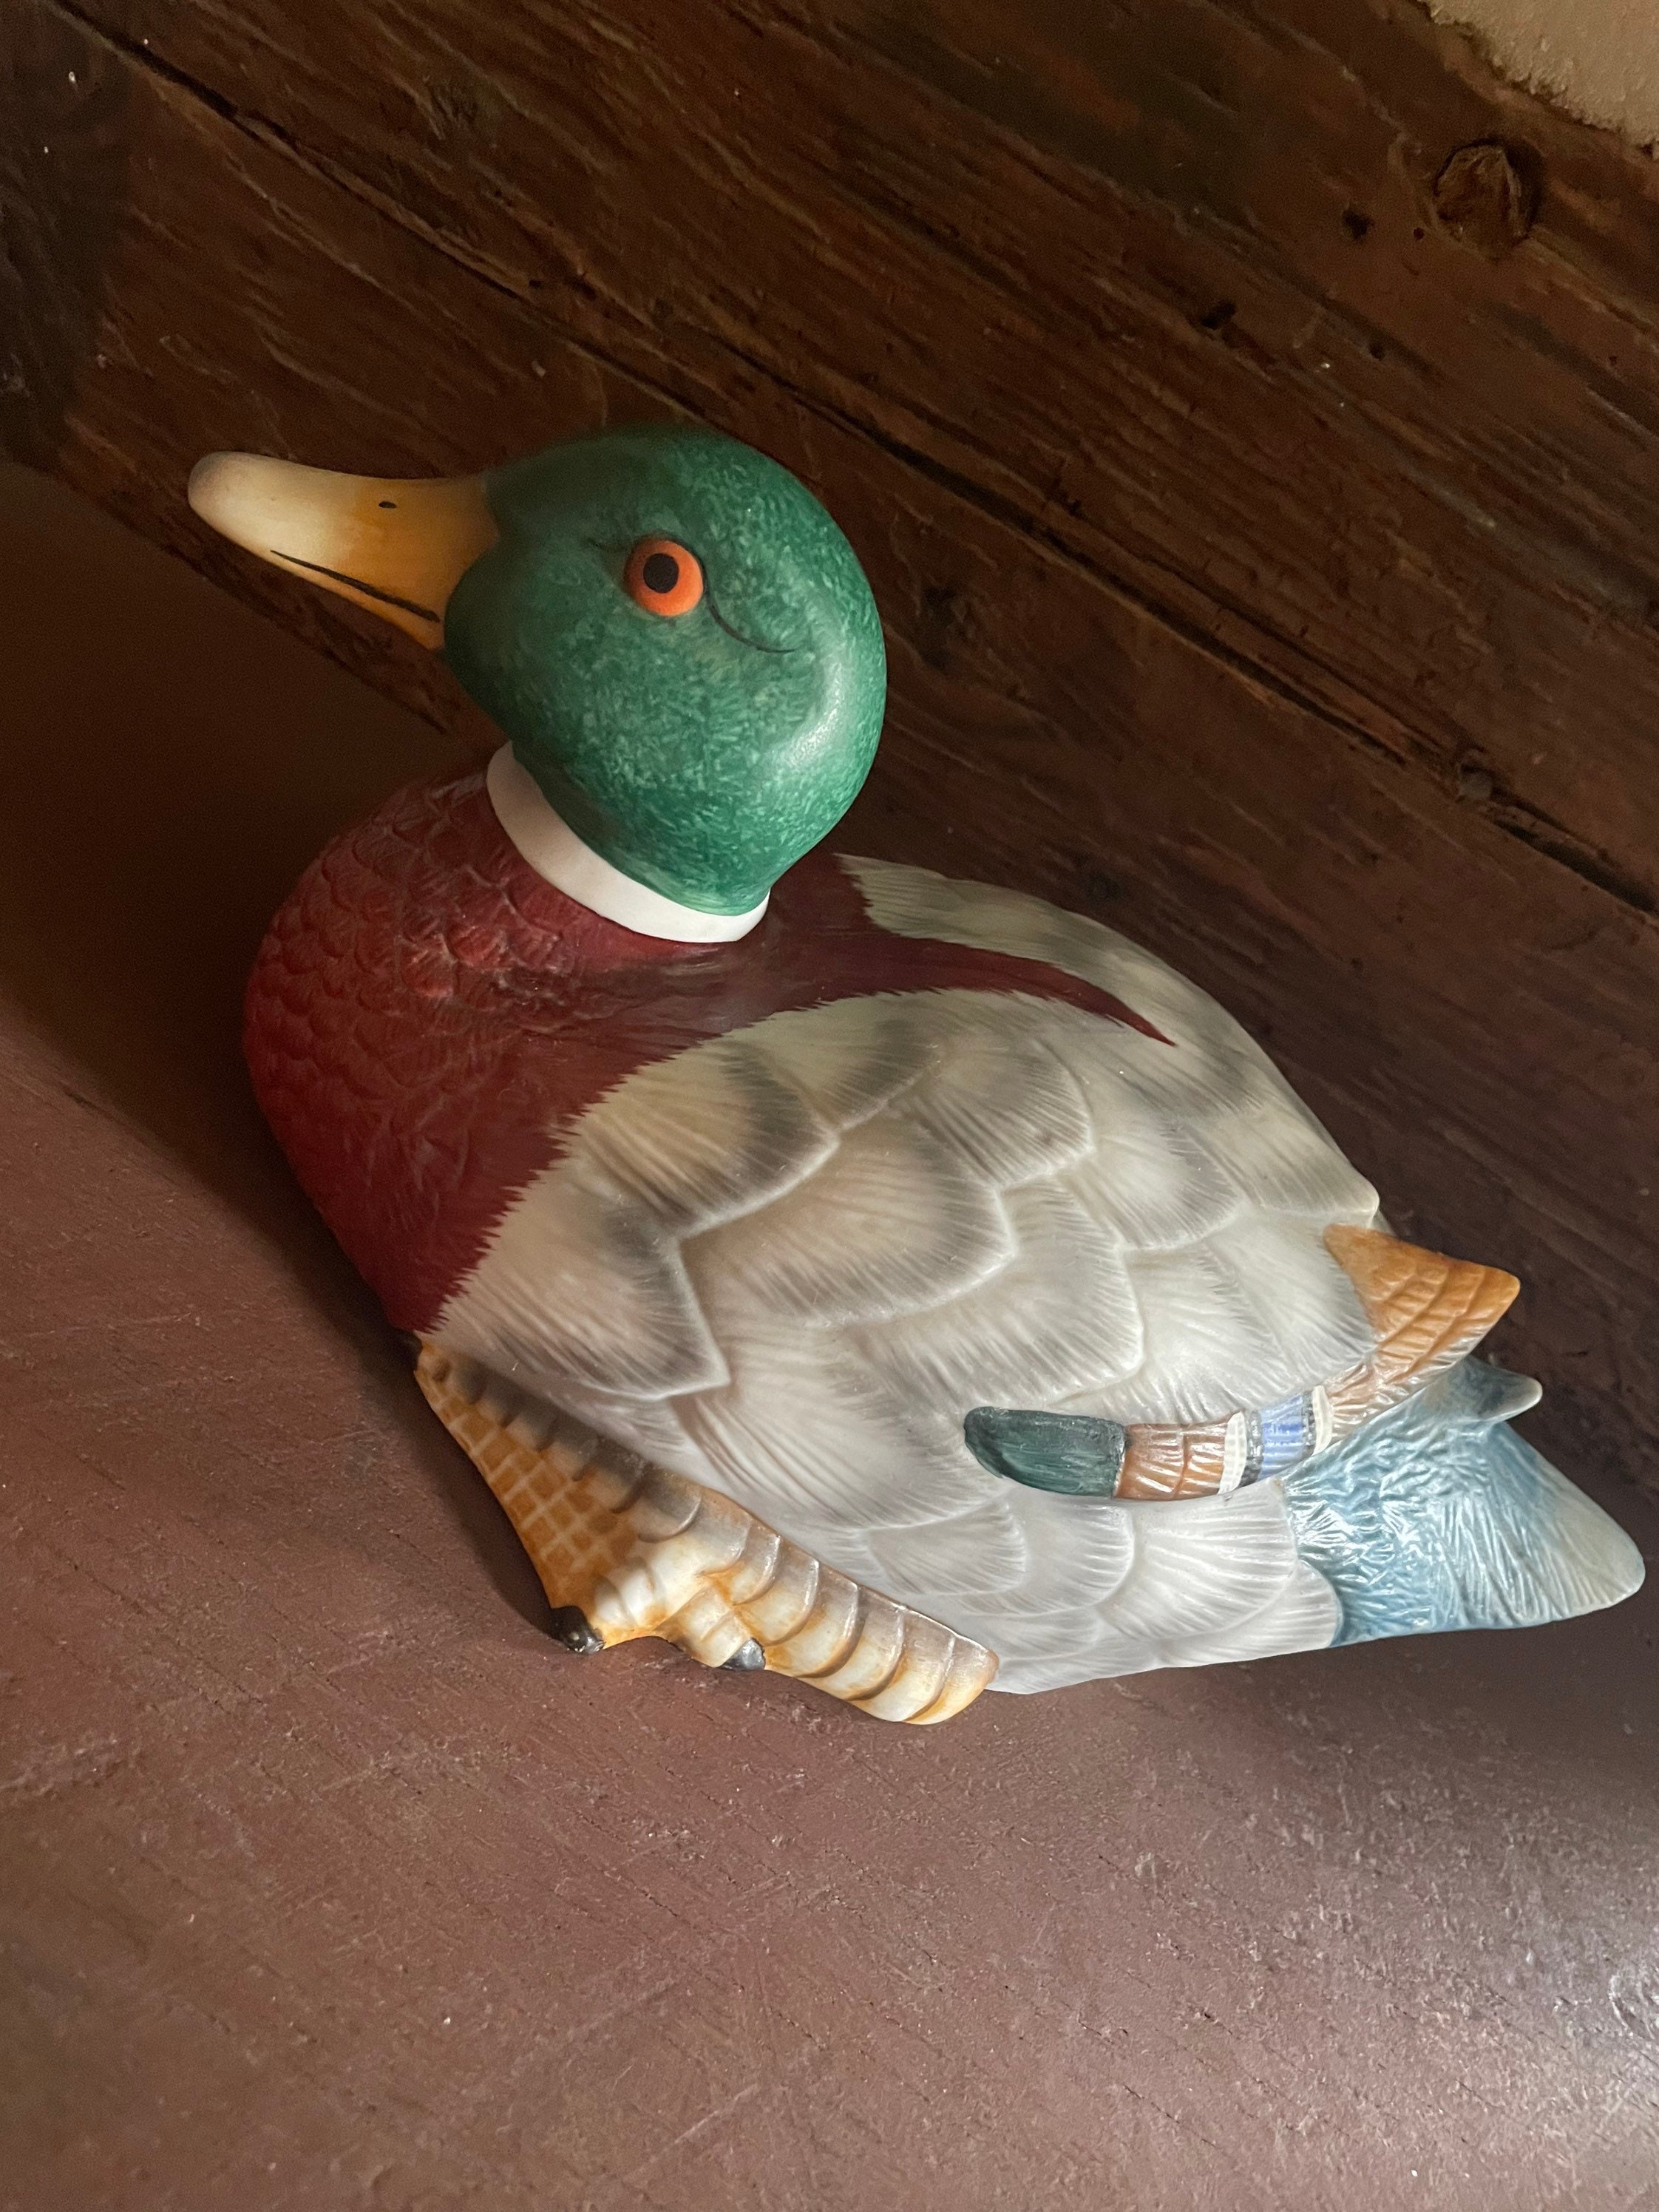 Porcelain Life Like Duck 9 in Man Cave Decor Gift